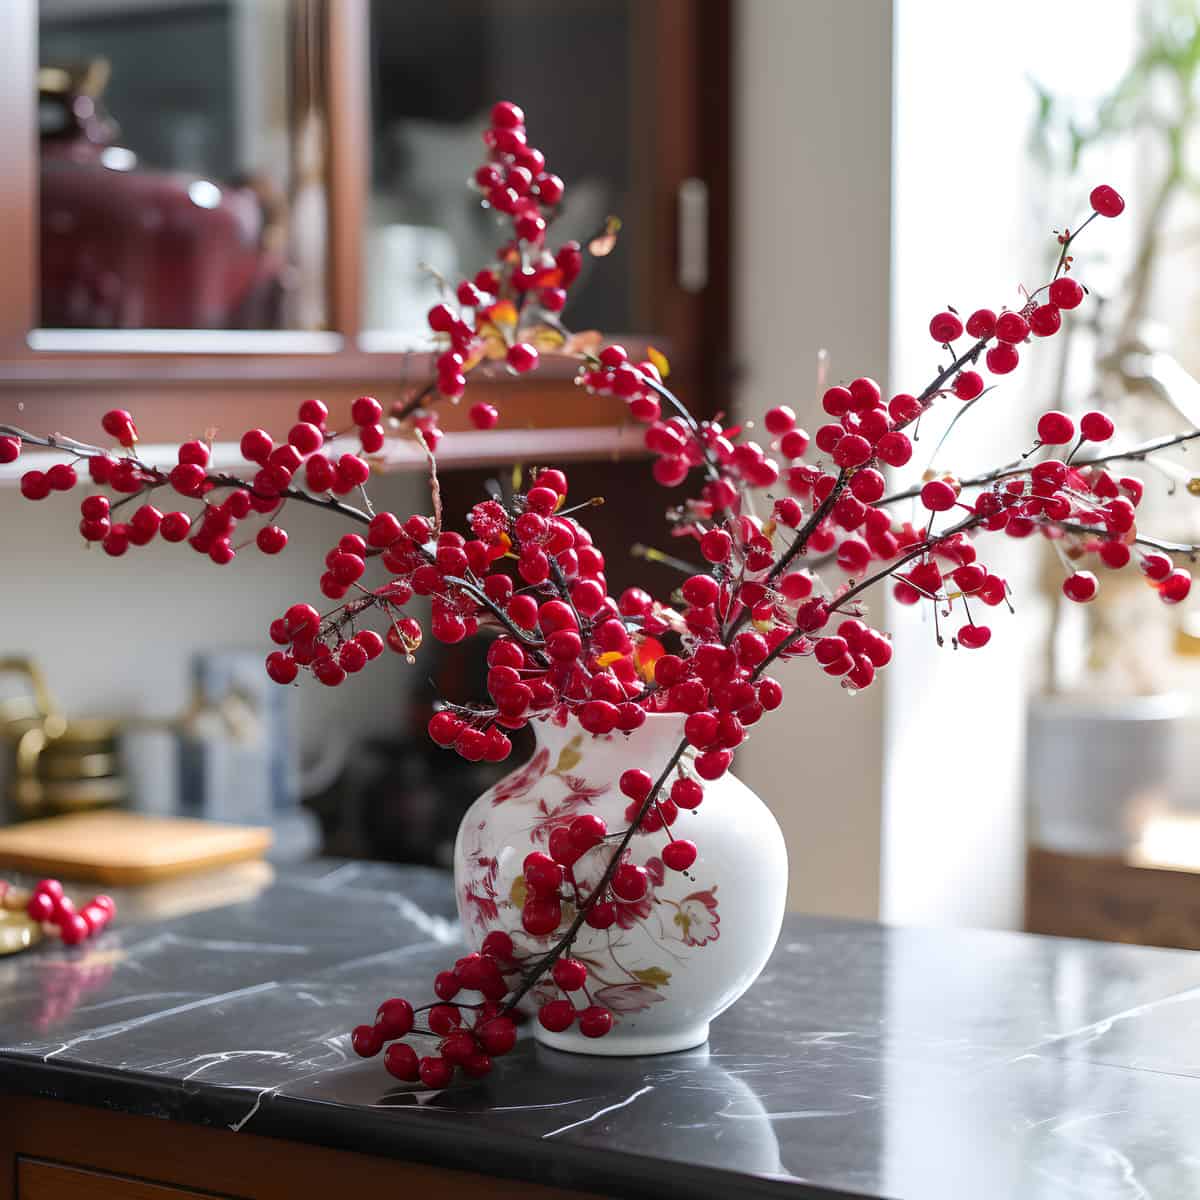 Nanjing Cherries on a kitchen counter